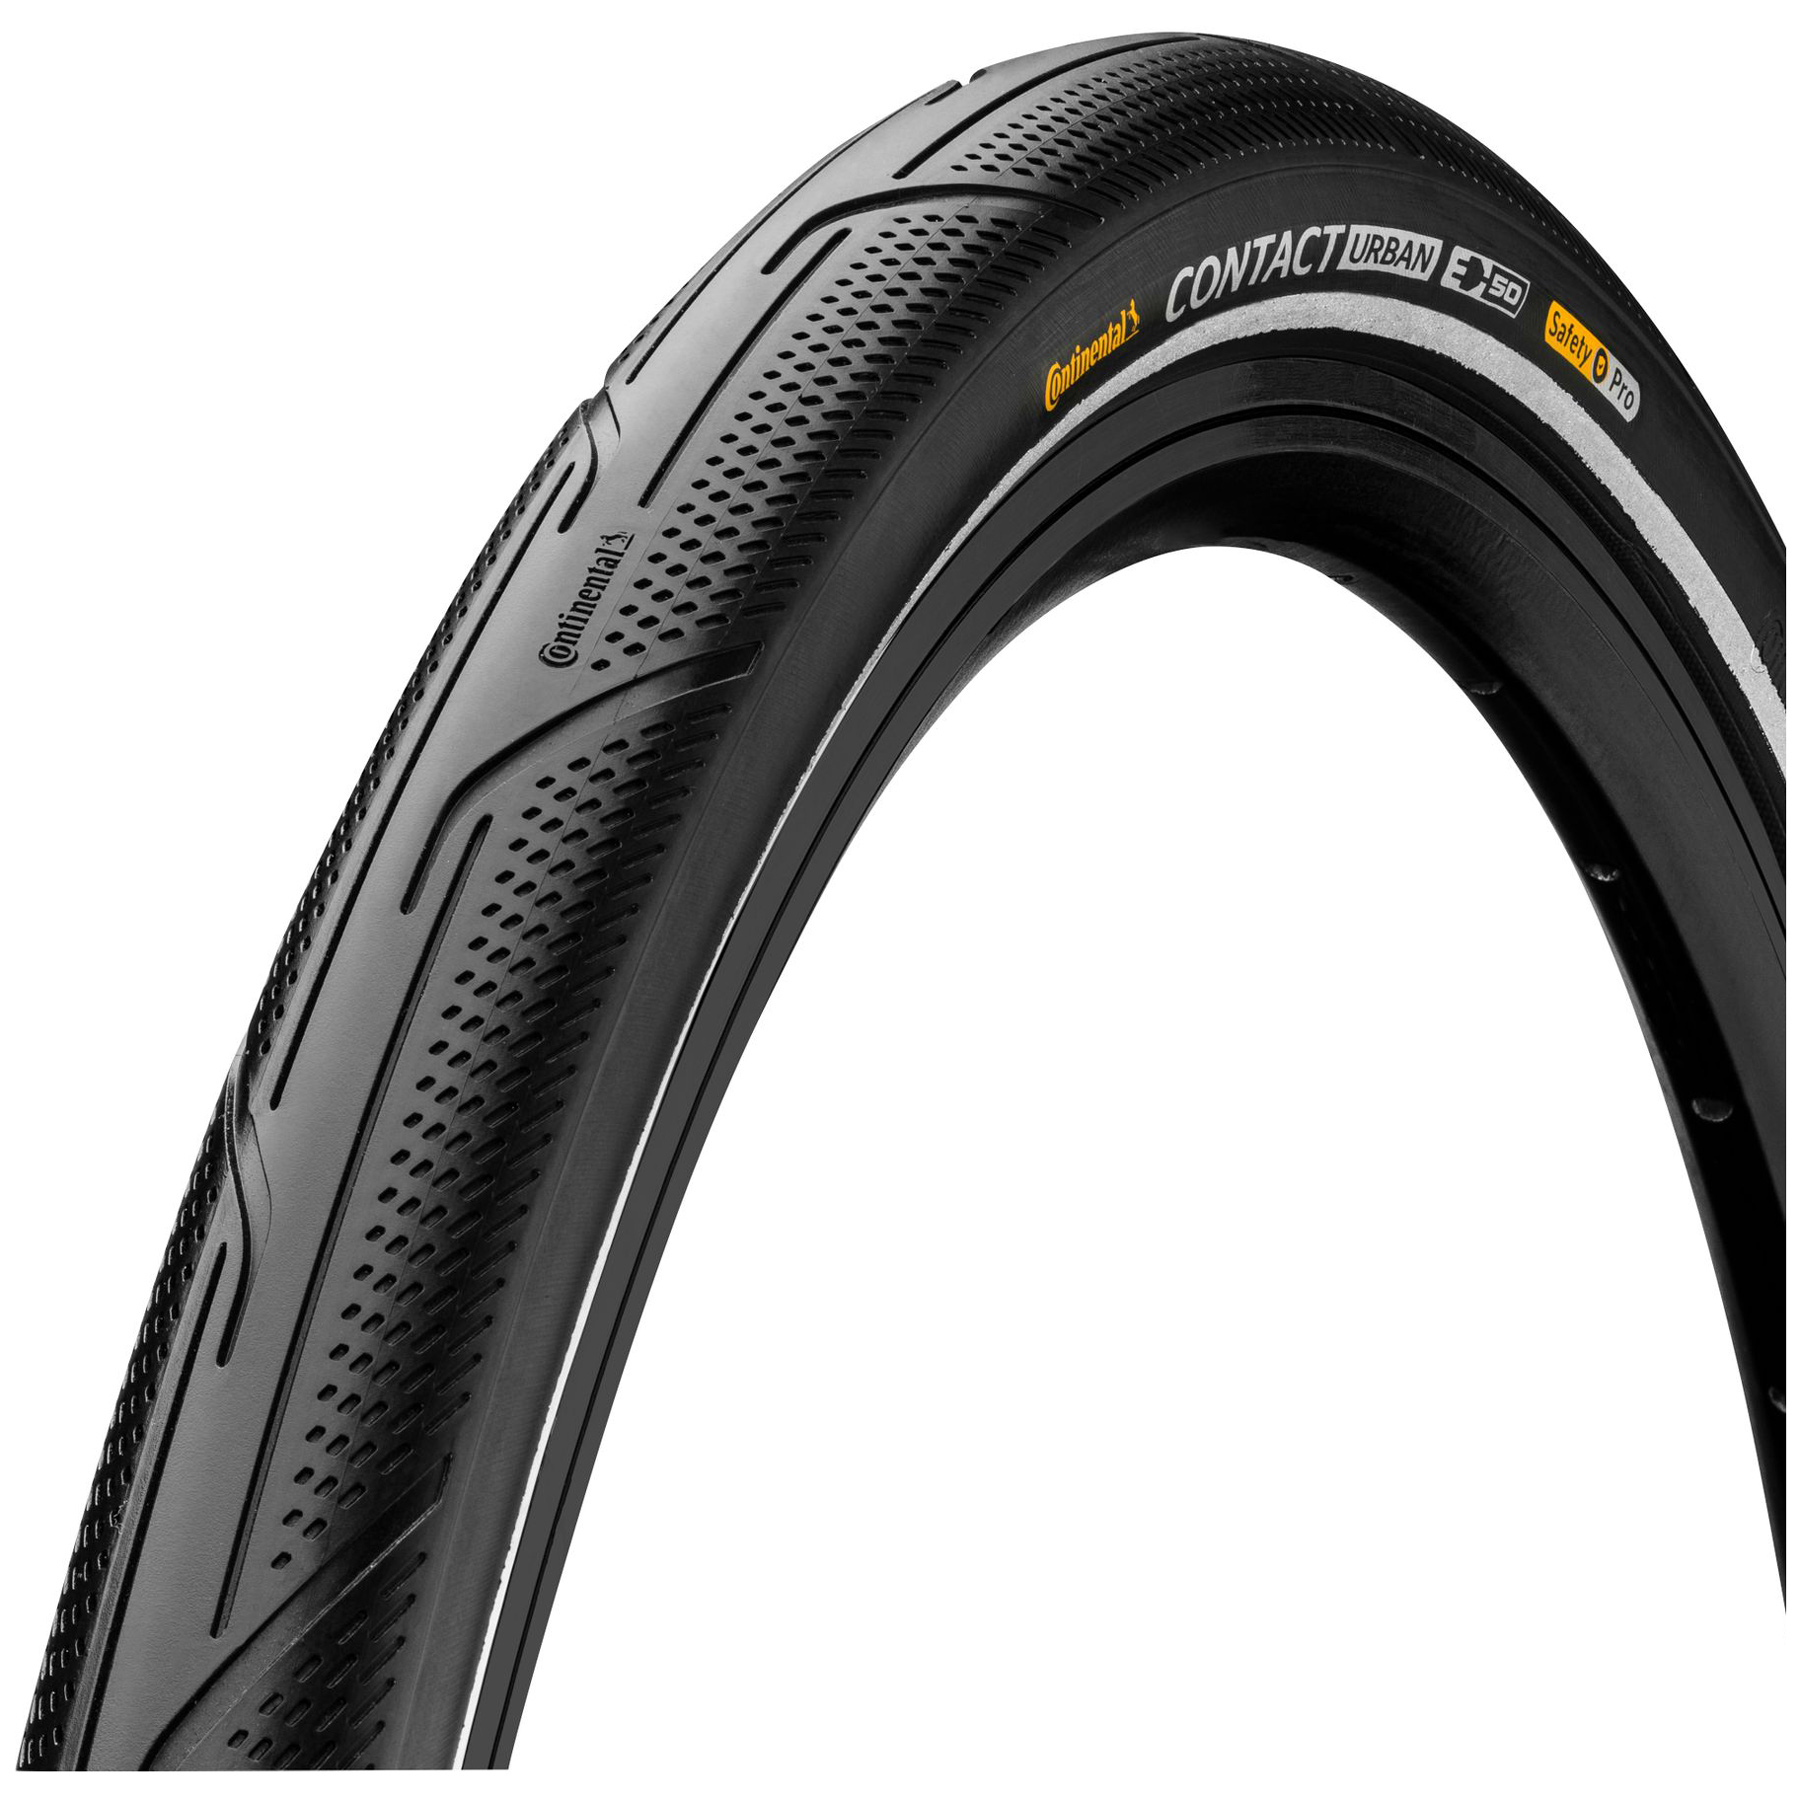 Picture of Continental Contact Urban Wire Bead Tire - PureGrip | black reflective - ECE-R75 - 42-584